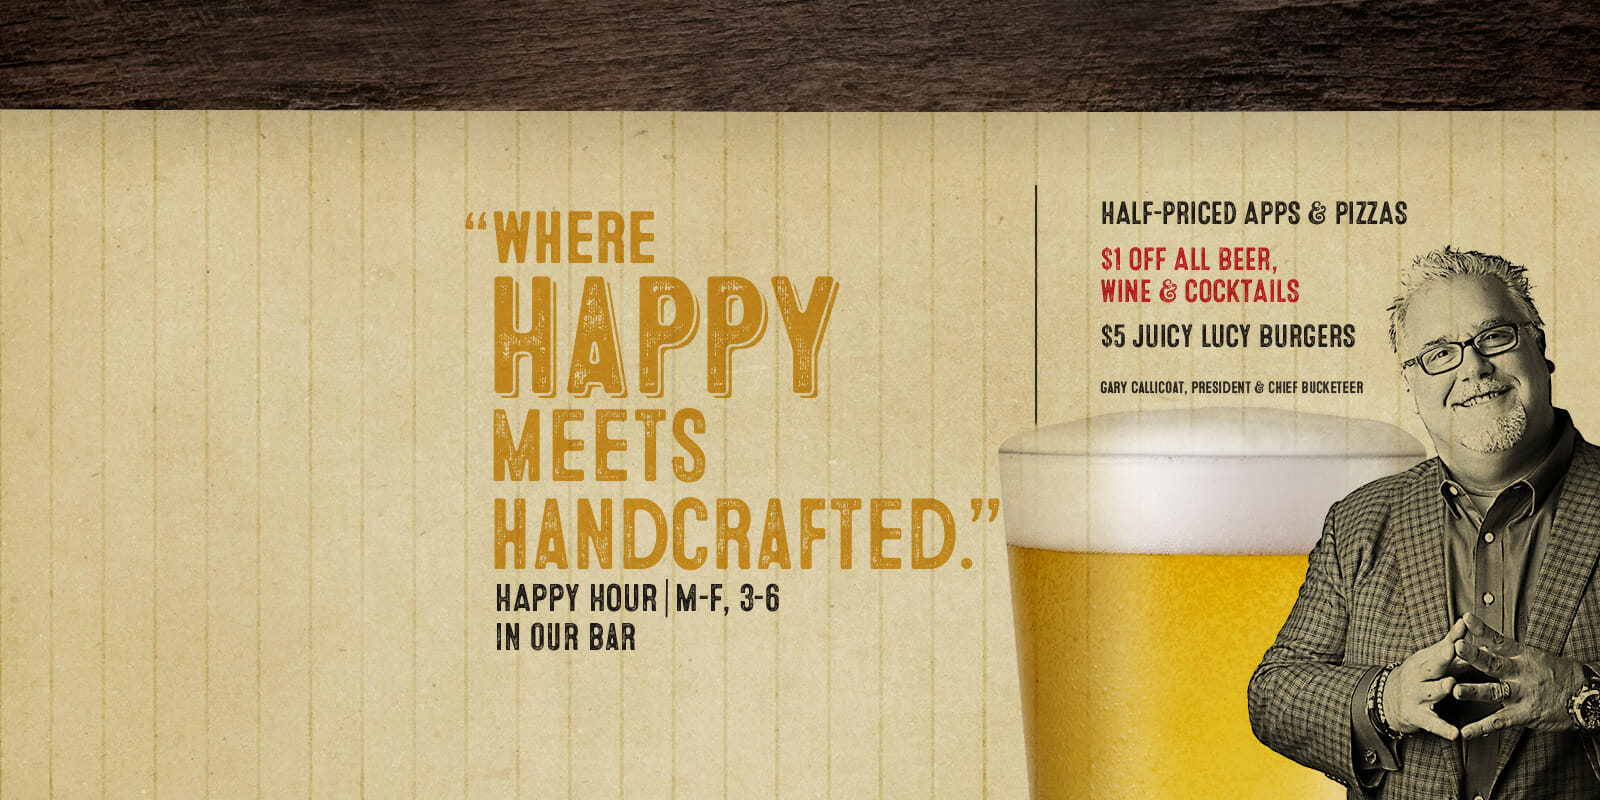 Where happy meets handcrafted. Happy hour M-F 3-6Pm in our bar at Rusty Bucket. Half priced apps & pizzas, $1 off all beer, wine & cocktails, and $5 Juicy Lucy Burgers.